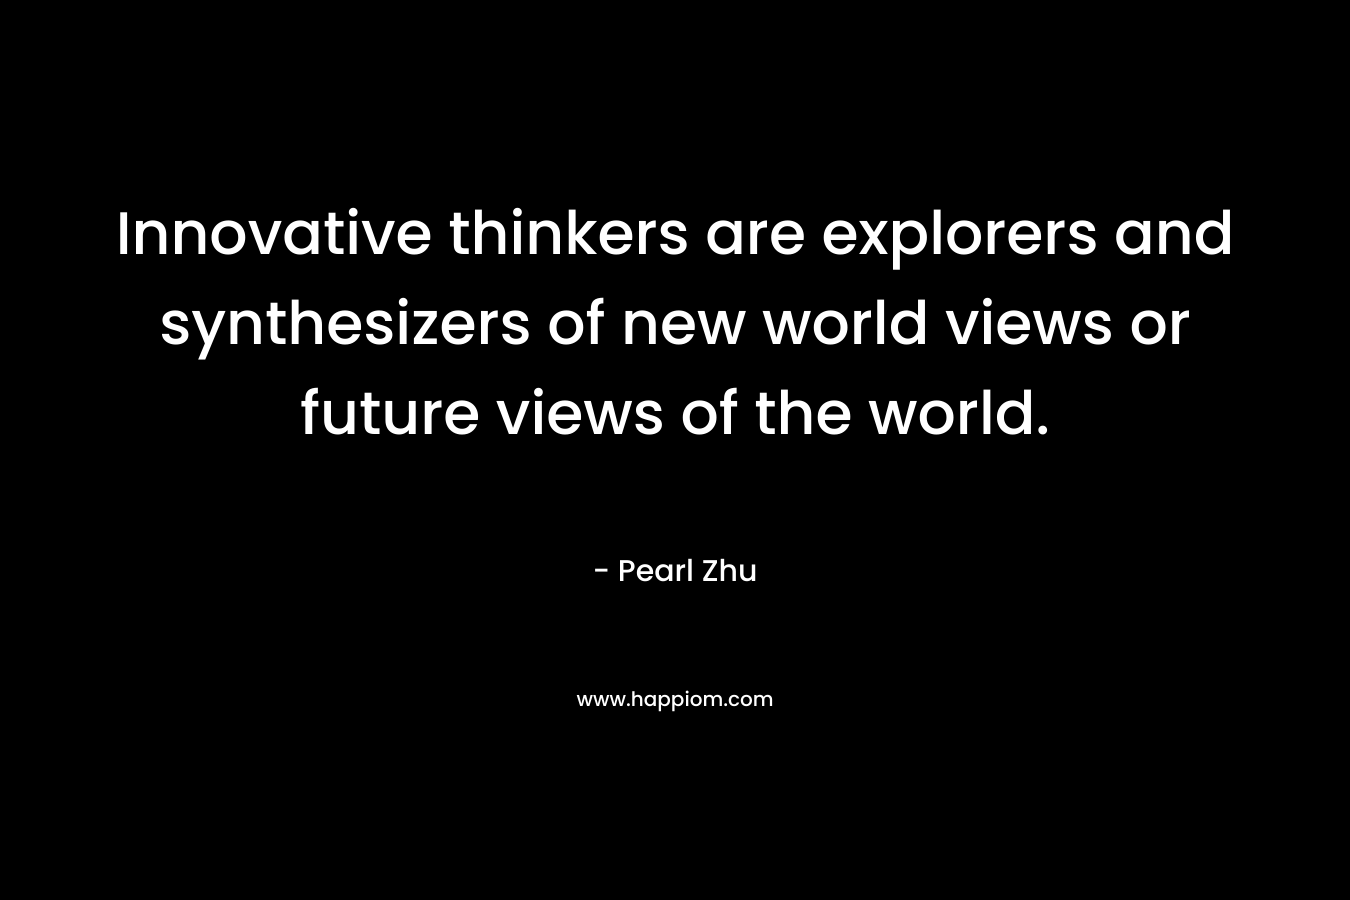 Innovative thinkers are explorers and synthesizers of new world views or future views of the world.